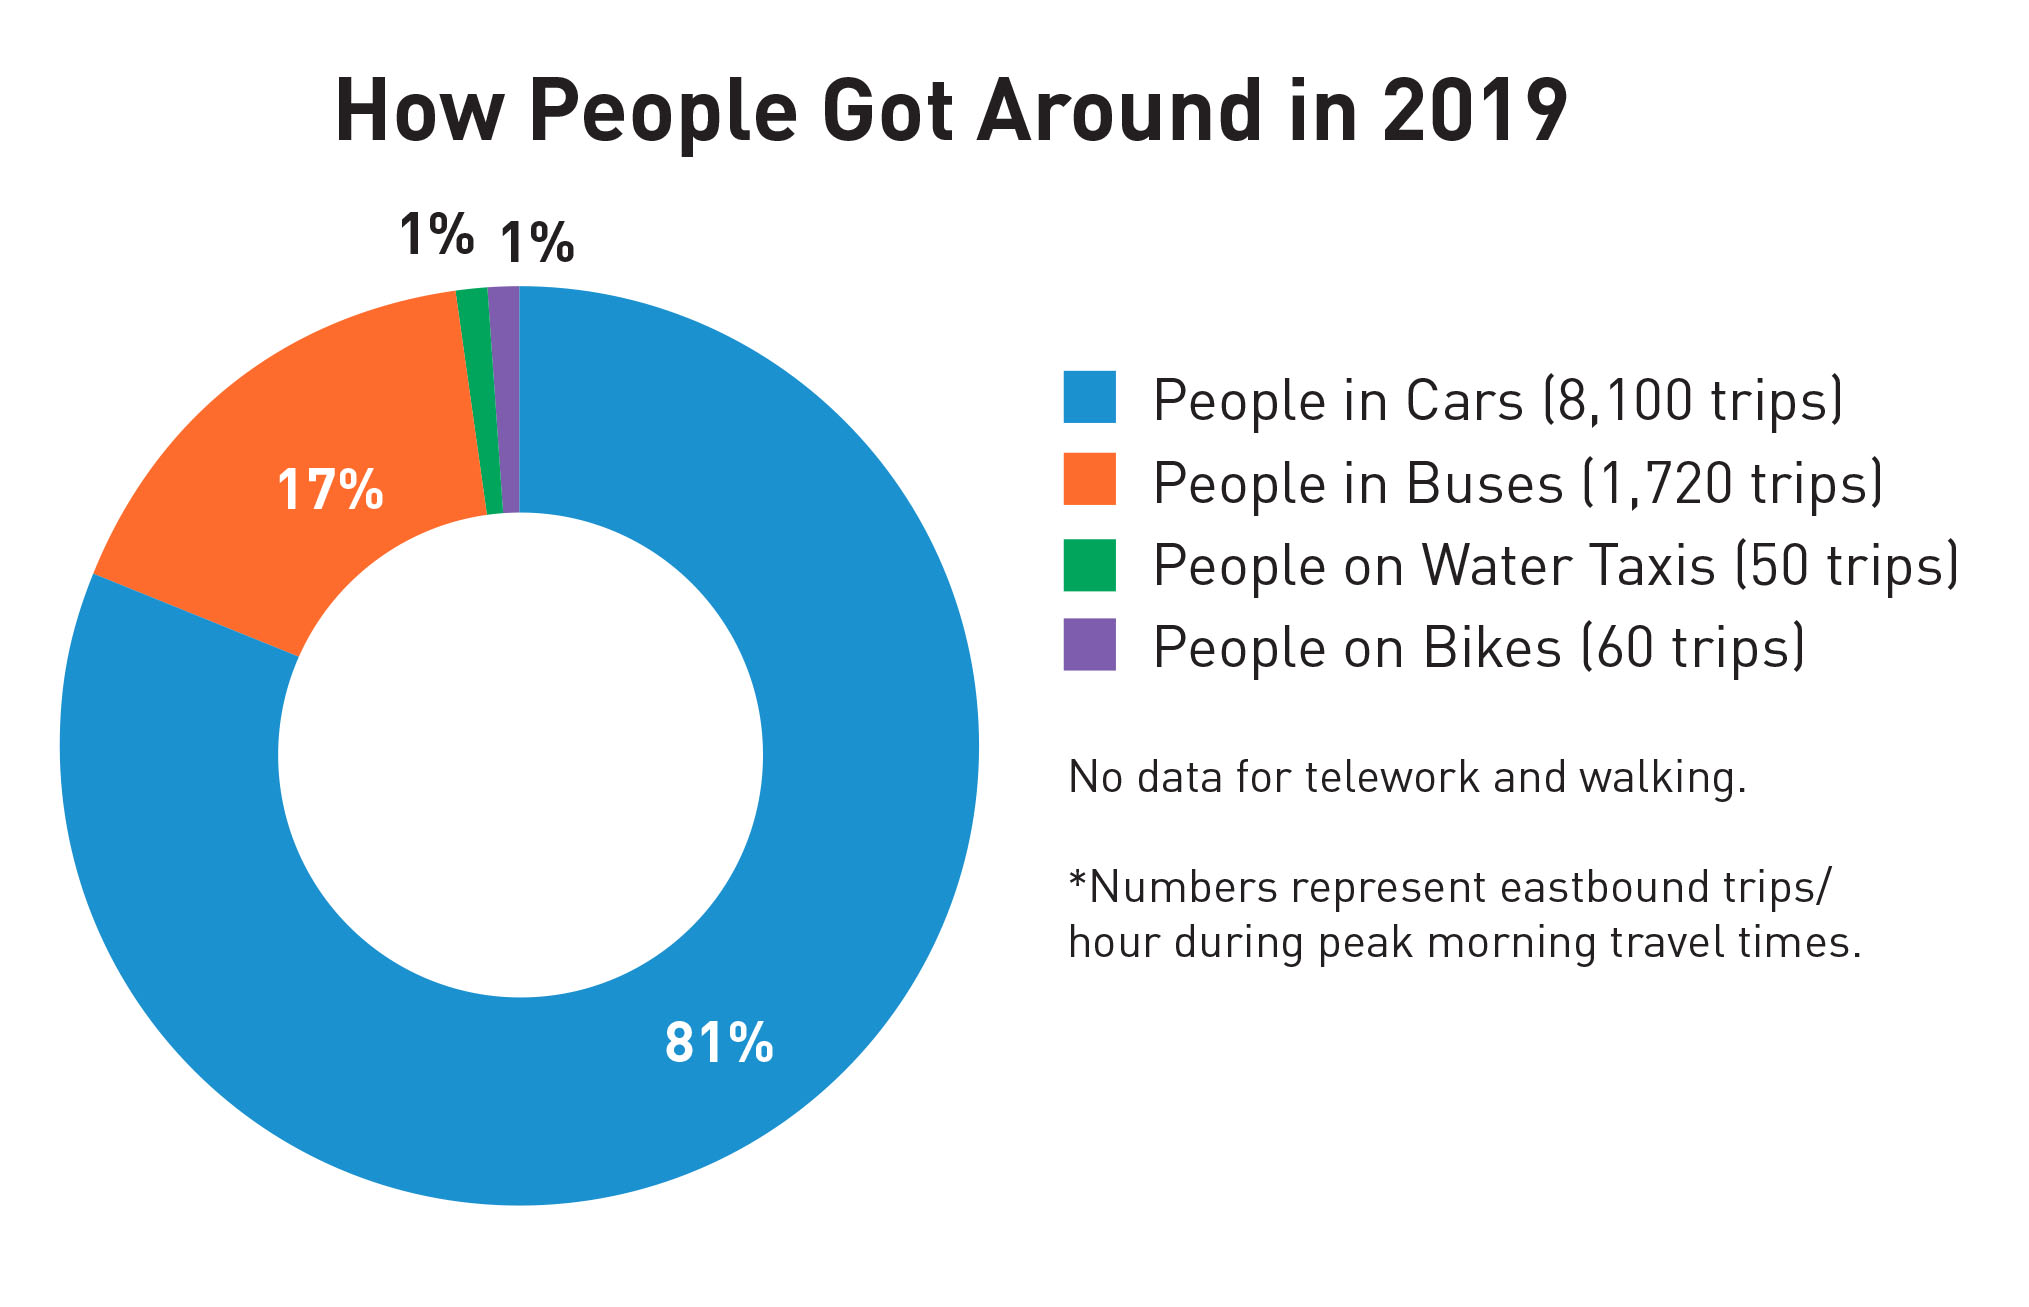 Pie chart of how people got around in 2019. 81% used cars, 17% used buses, 1% used water taxis, 1% used bikes. No data for teleworking or people walking. These numbers represent eastbound trips per hour during peak morning travel times